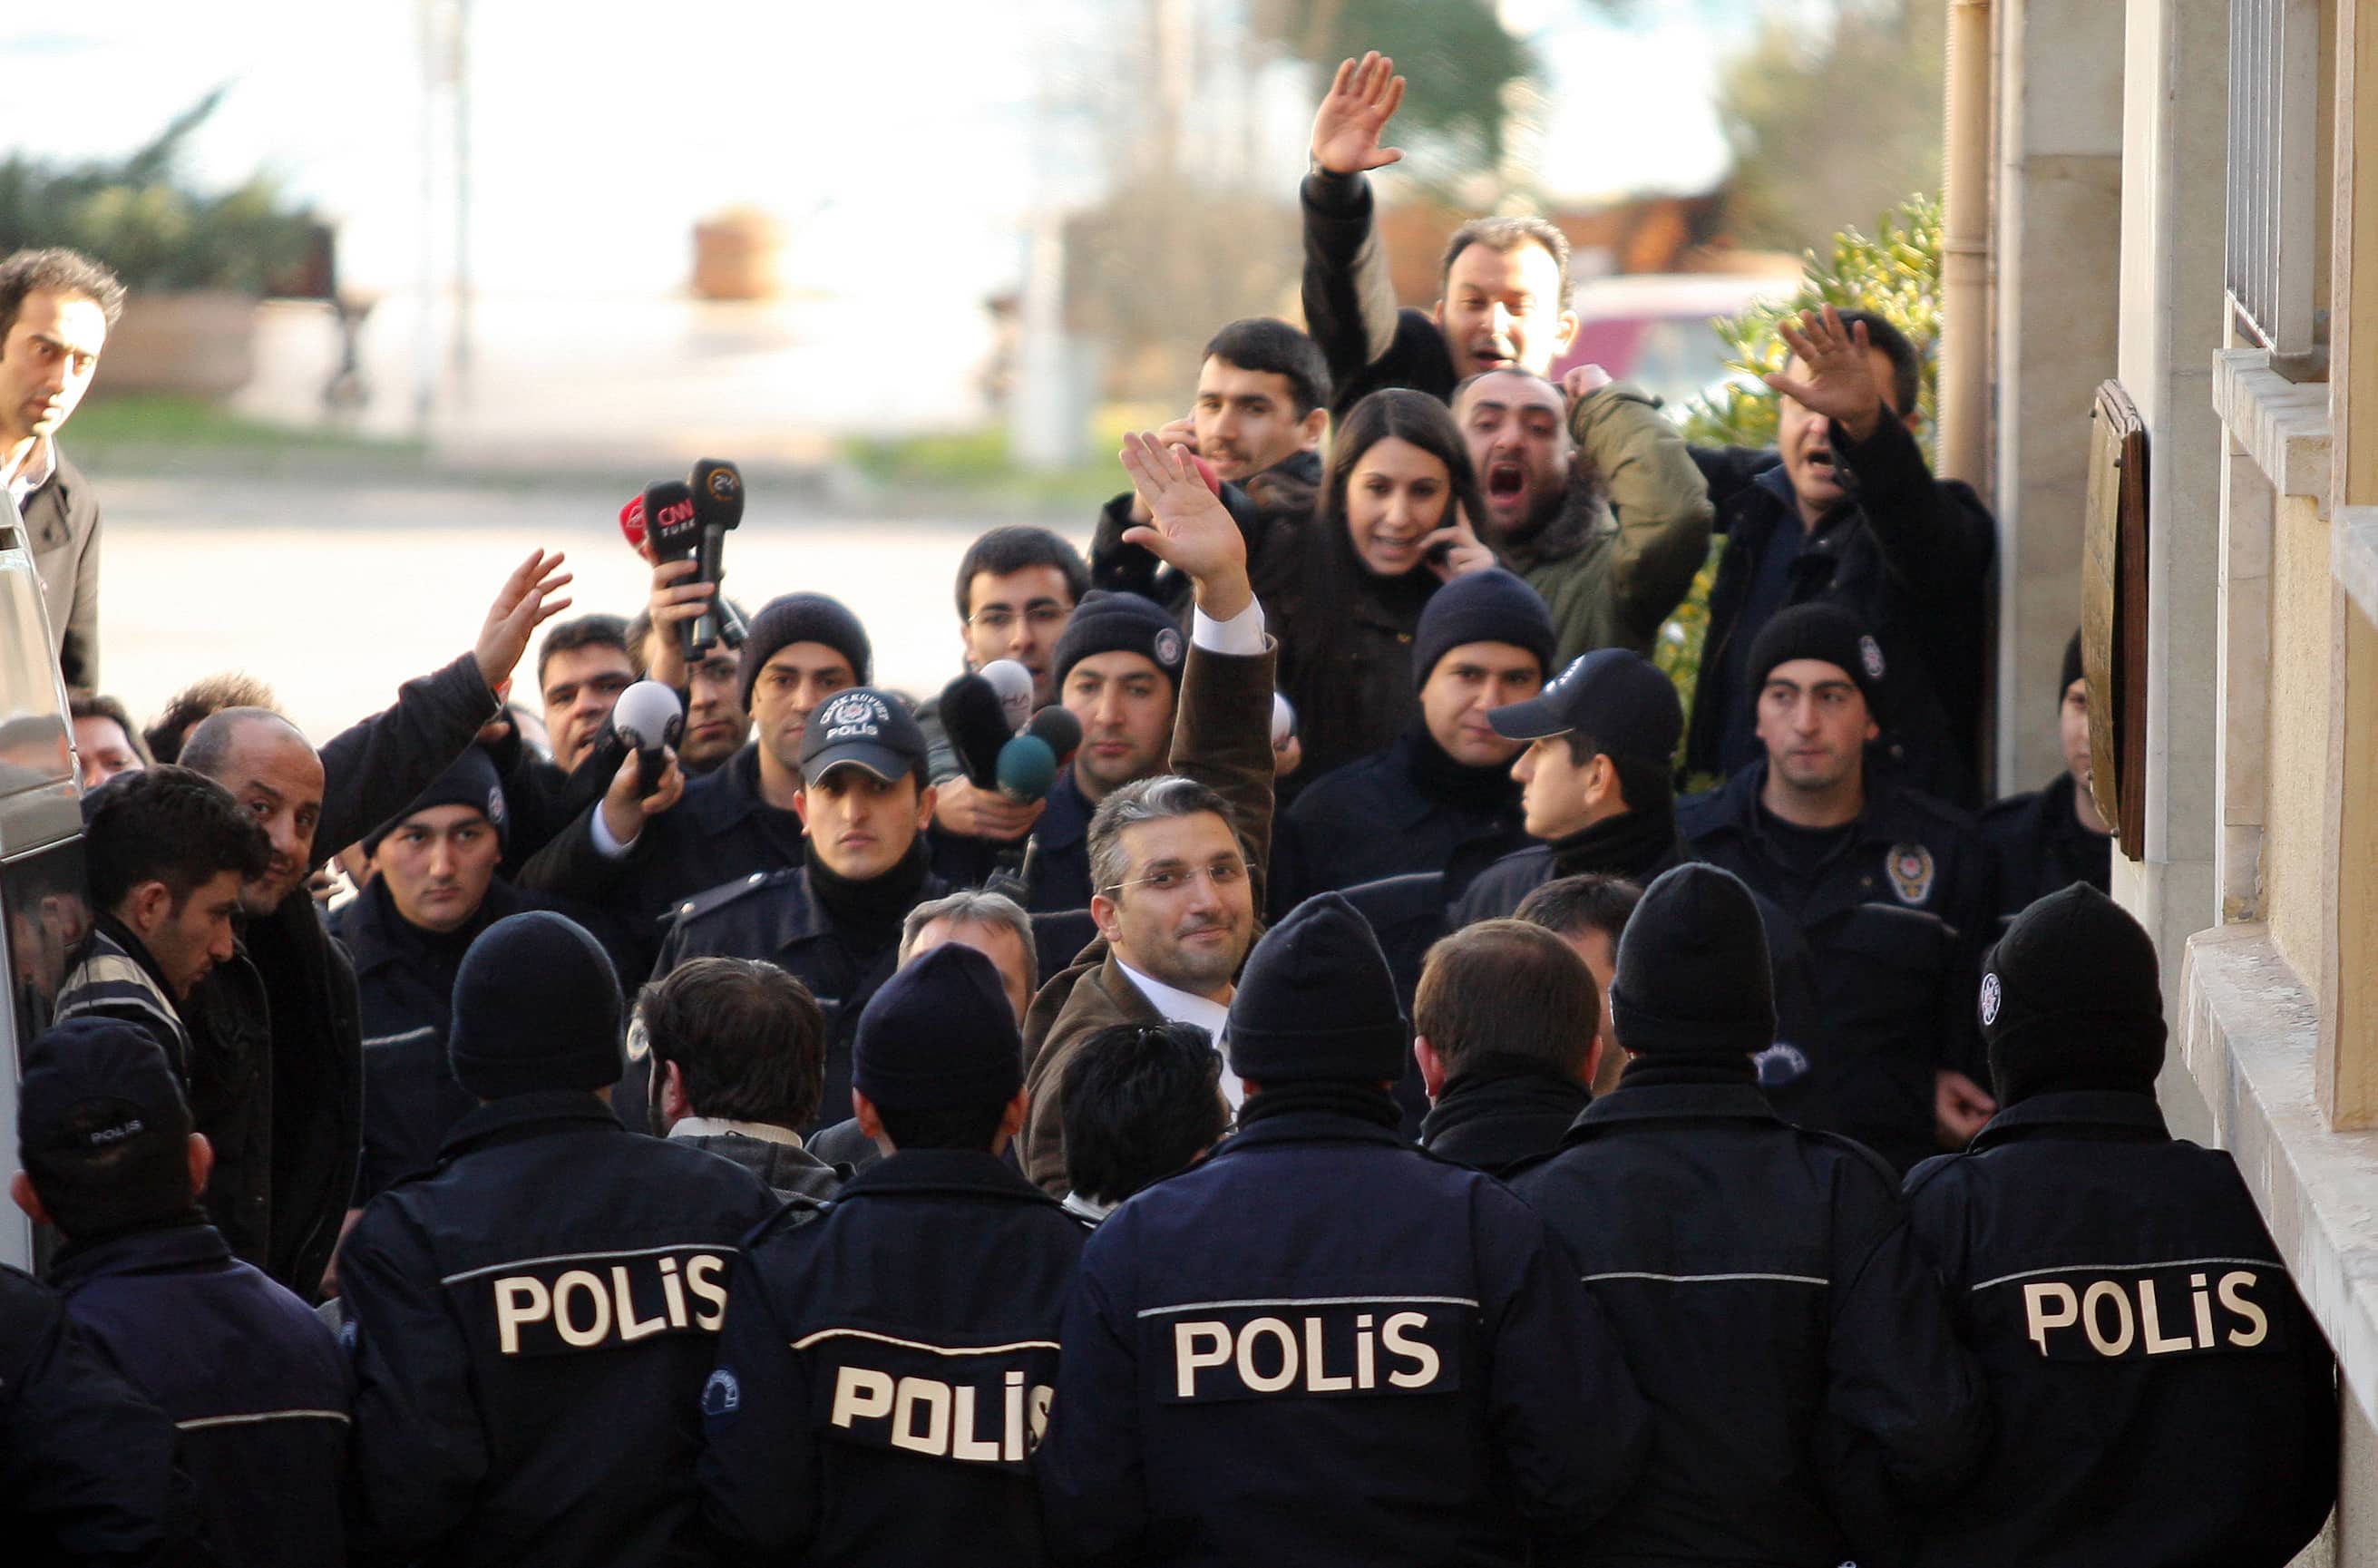 Journalists Nedim Sener (C) and Ahmet Sik (facing camera, 3rd L) wave upon arrival at a courthouse in Istanbul, 5 March 2011,  REUTERS/Ozan Guzelce/Milliyet/Handout